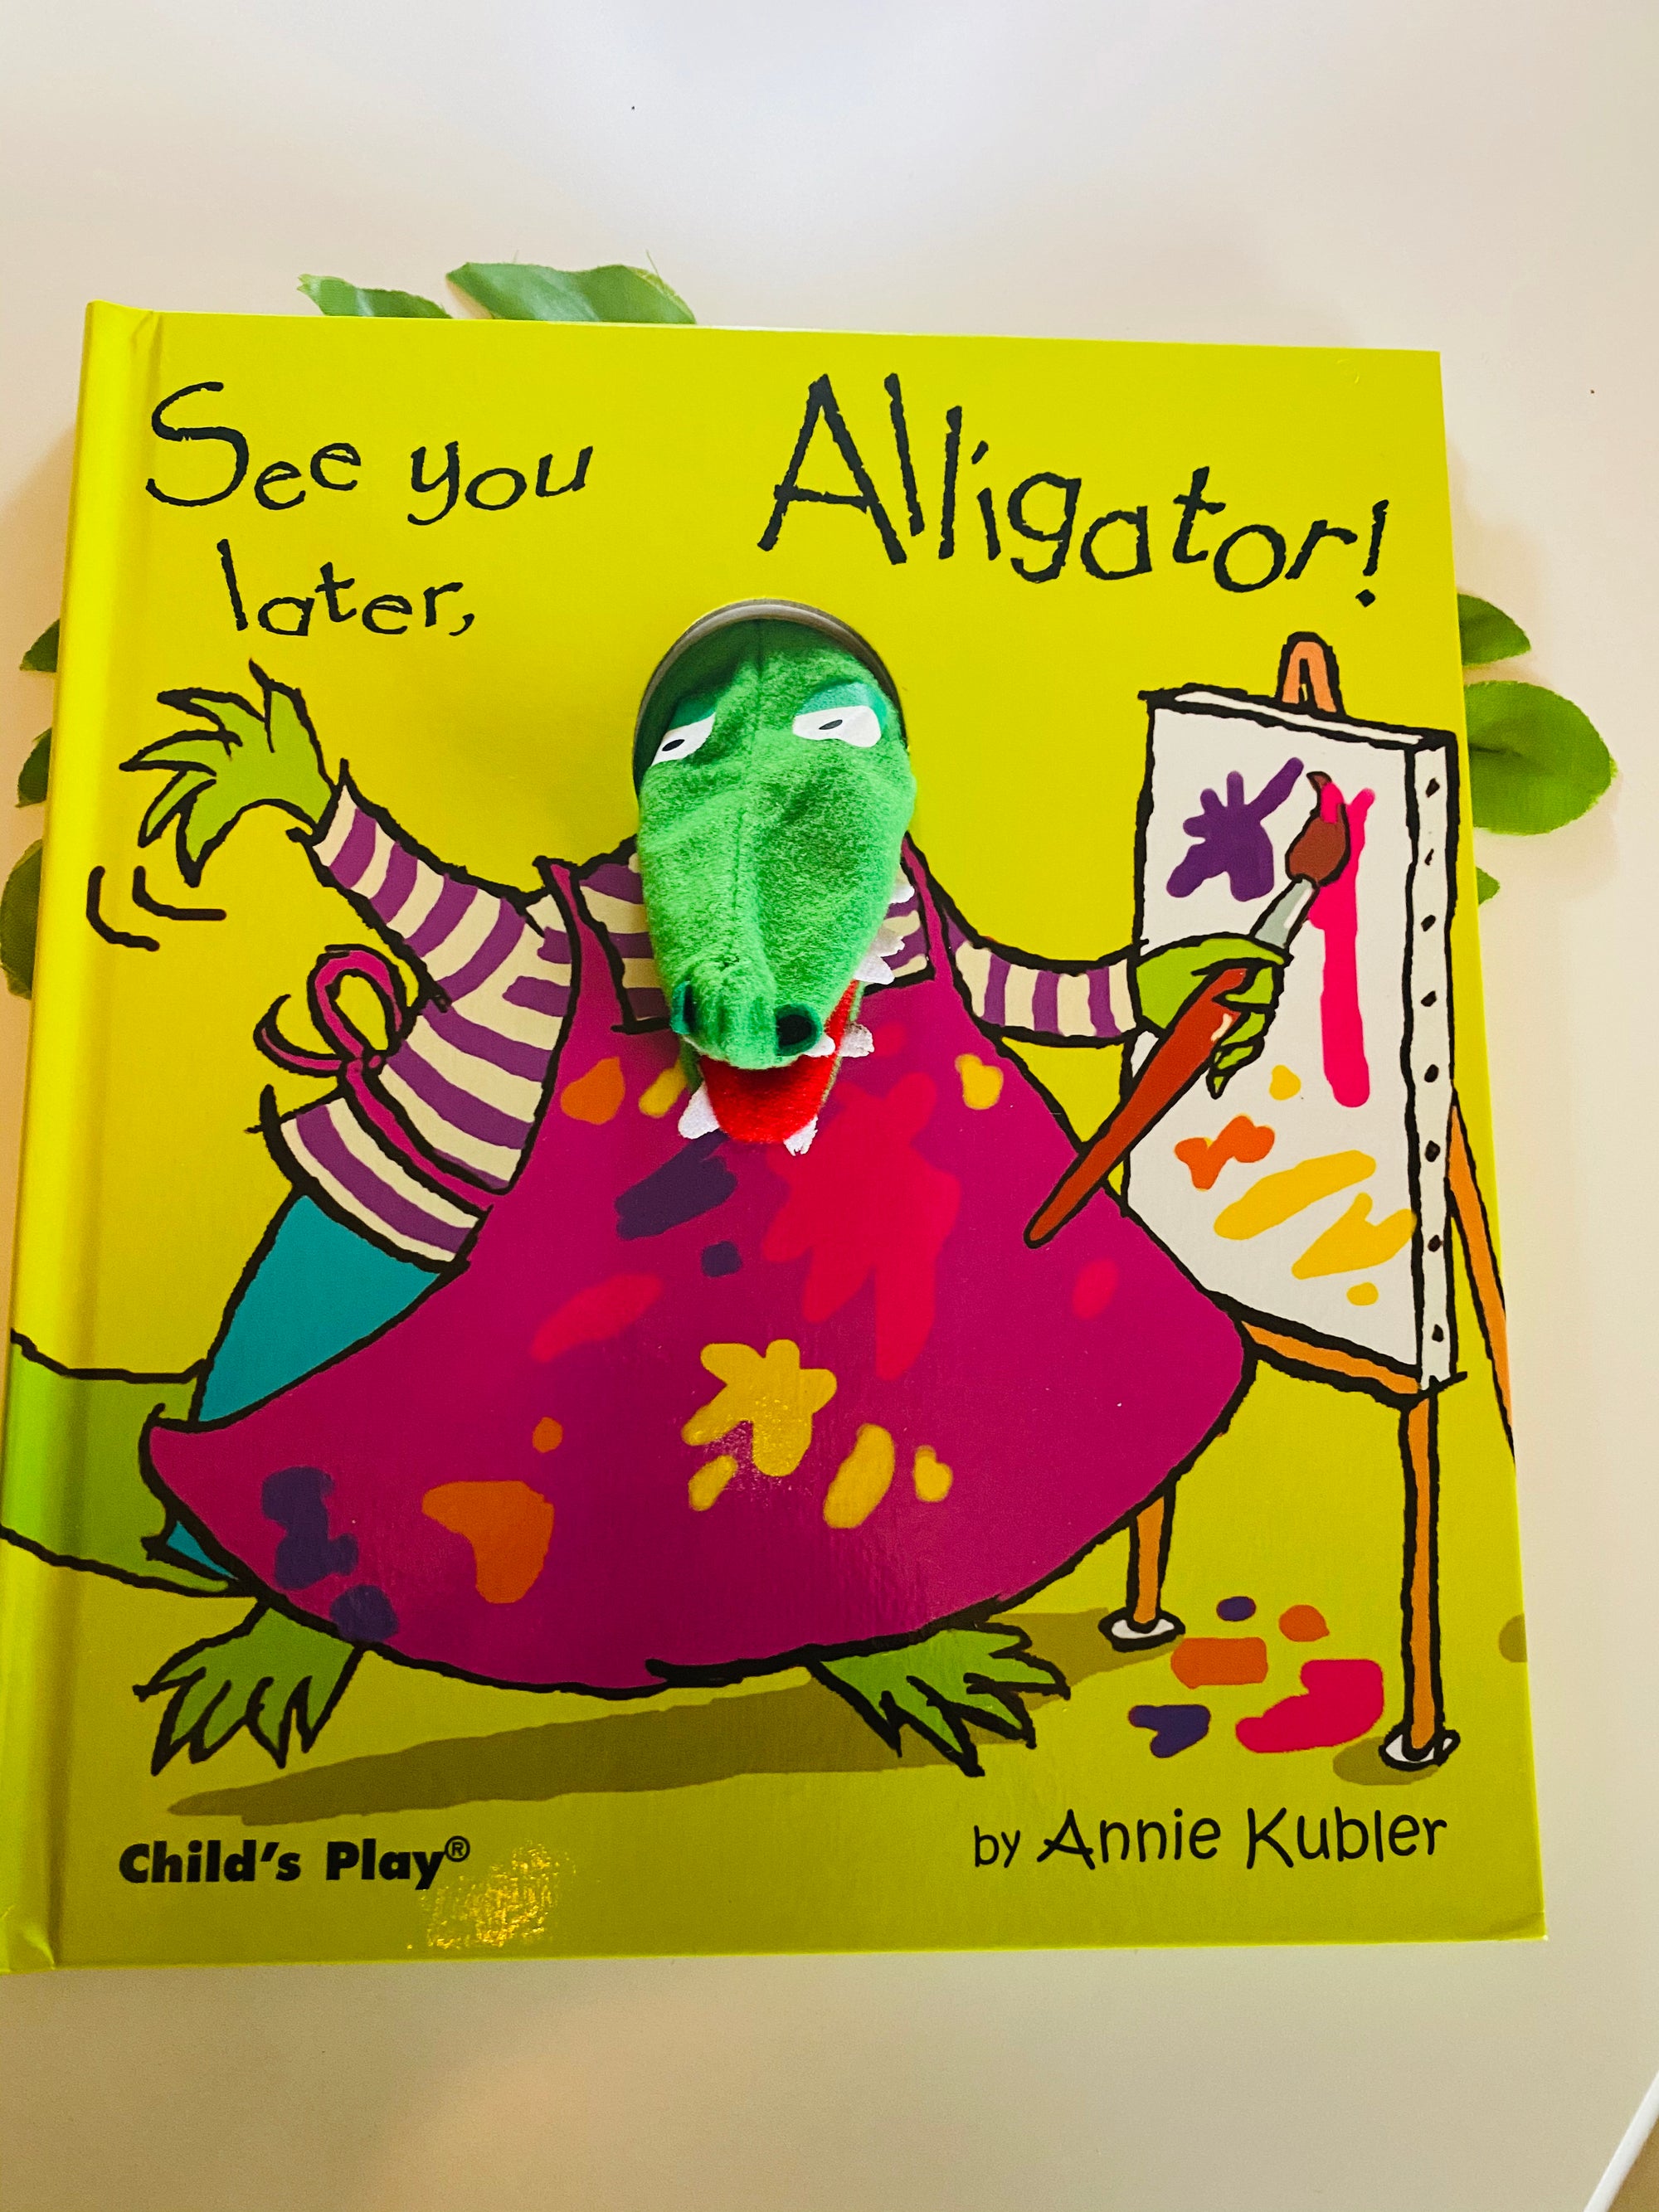 See you later, Alligator Finger Puppet Book!